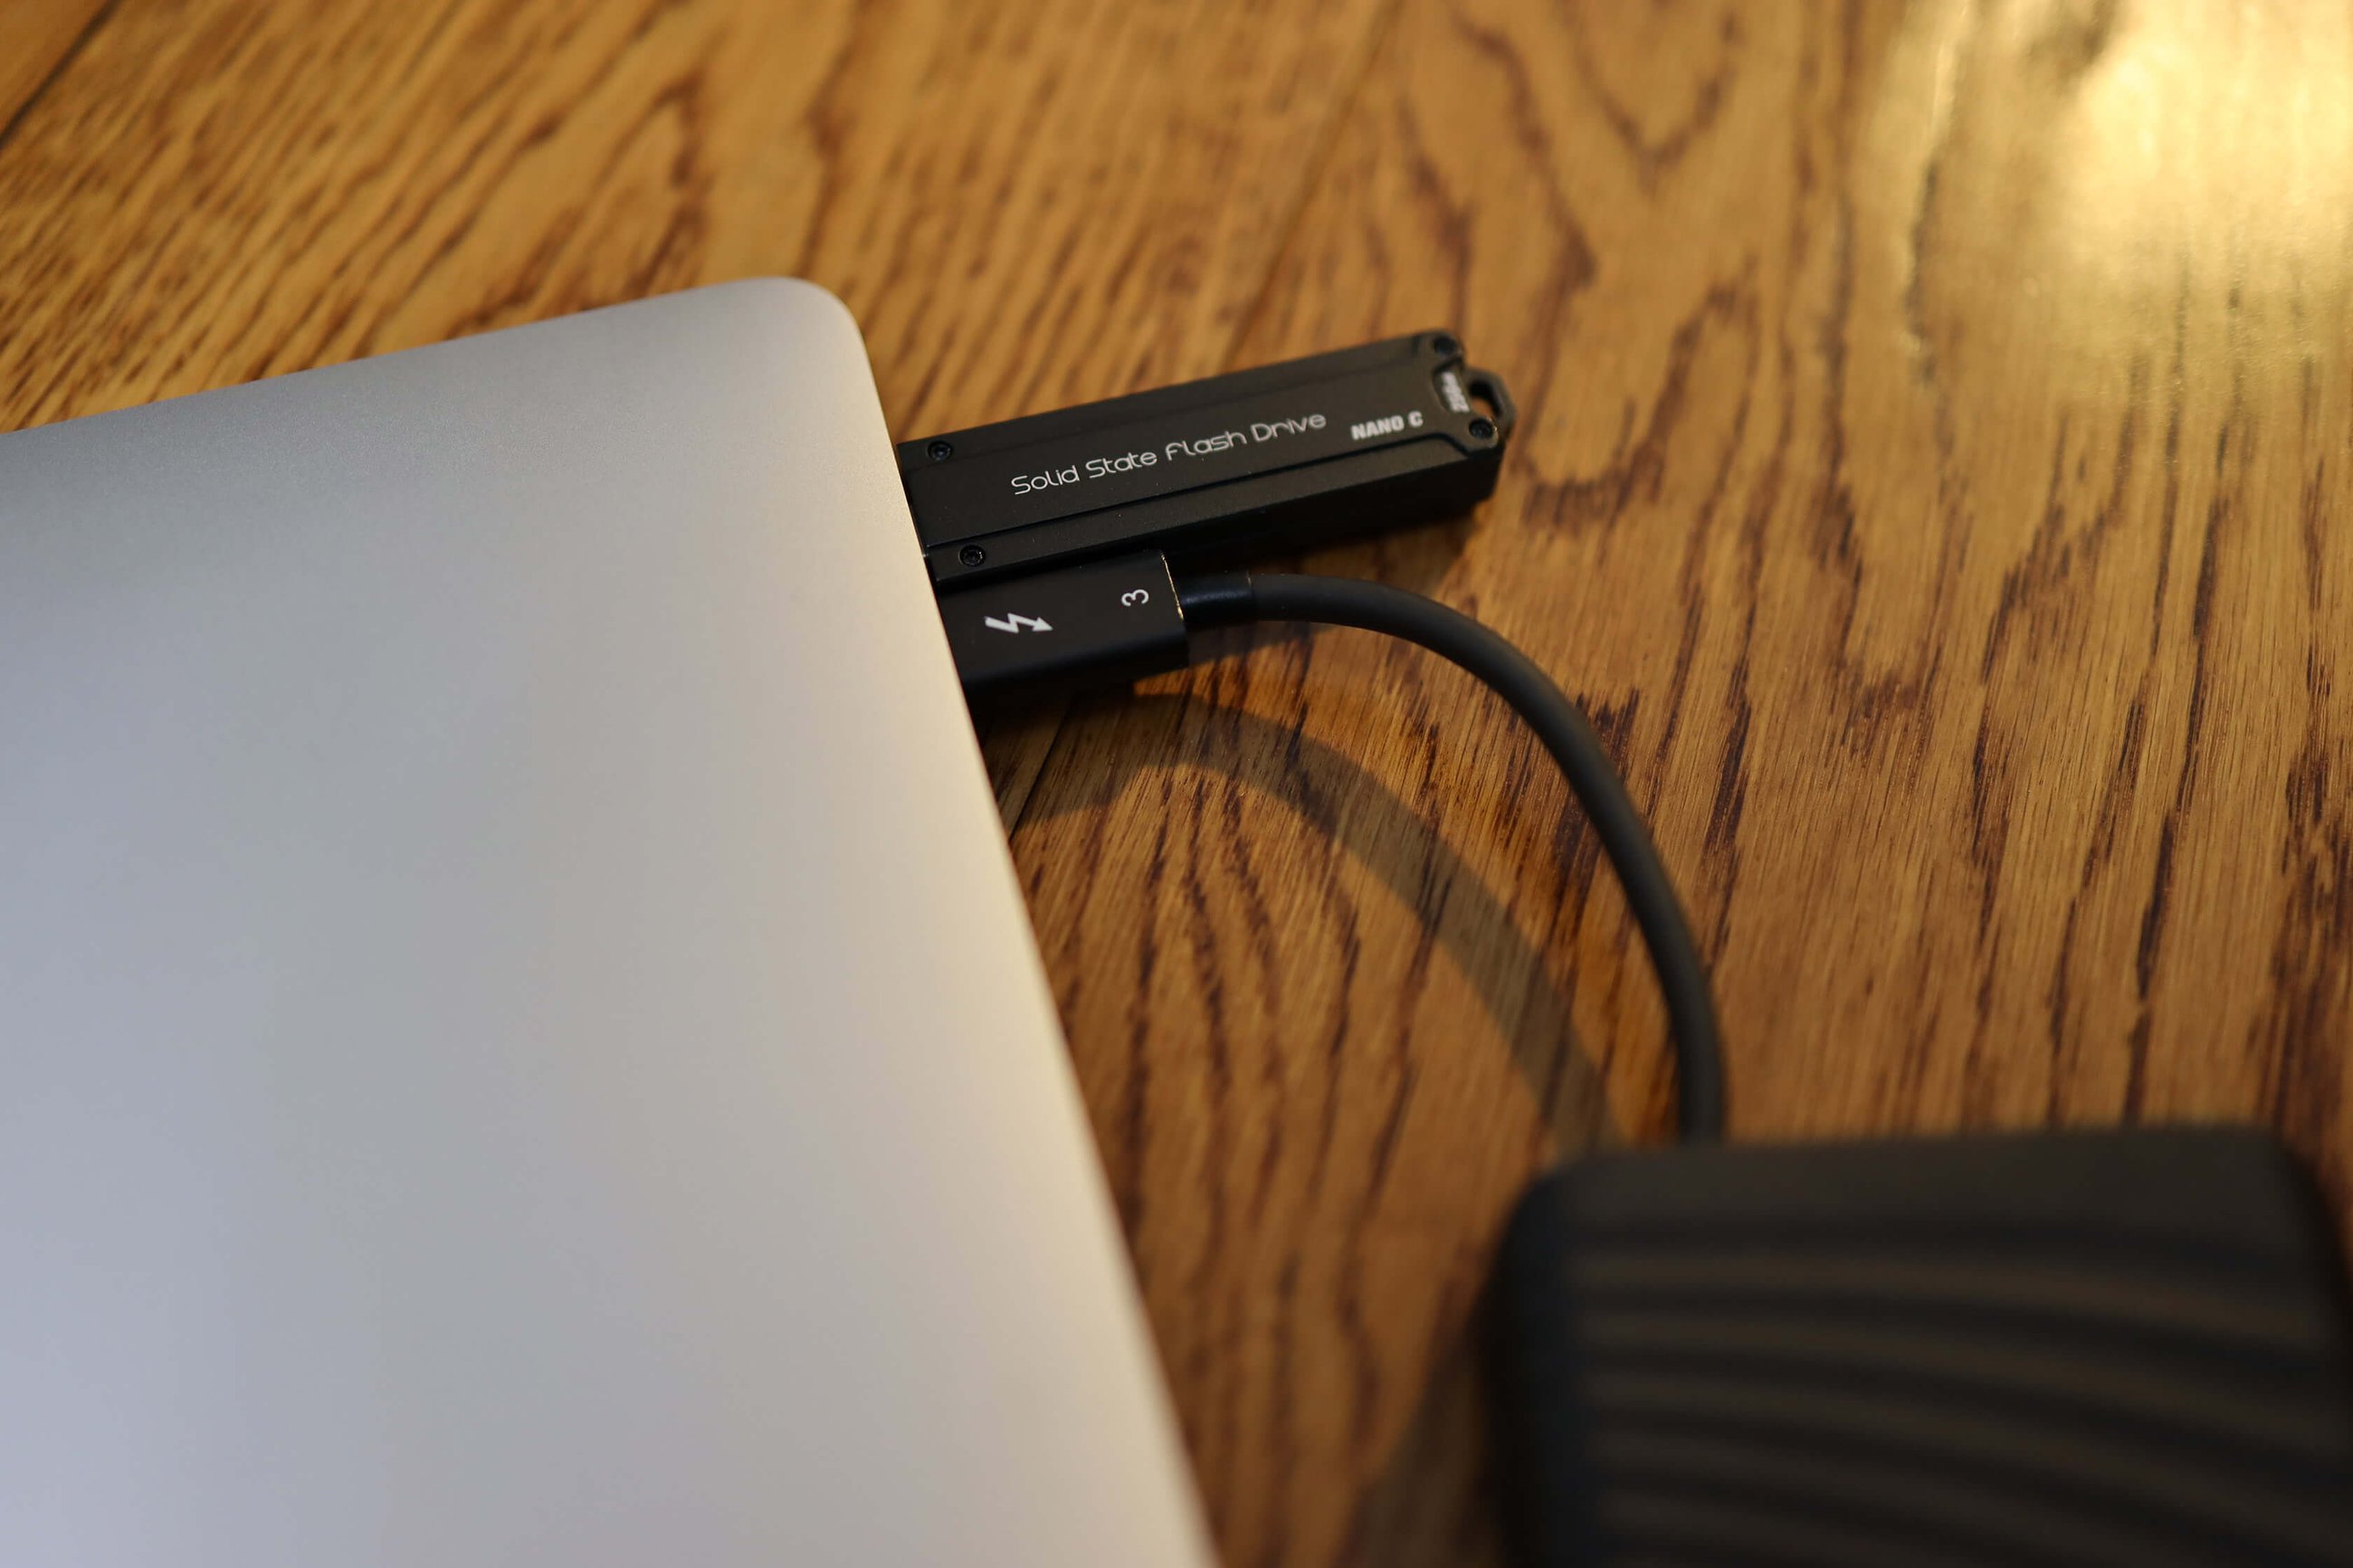 On a MacBook Pro, even if a CHIPFANCIER SSD USB flash drive is installed in one port, there is still room for other Type-C devices to be connected to the port next to it.